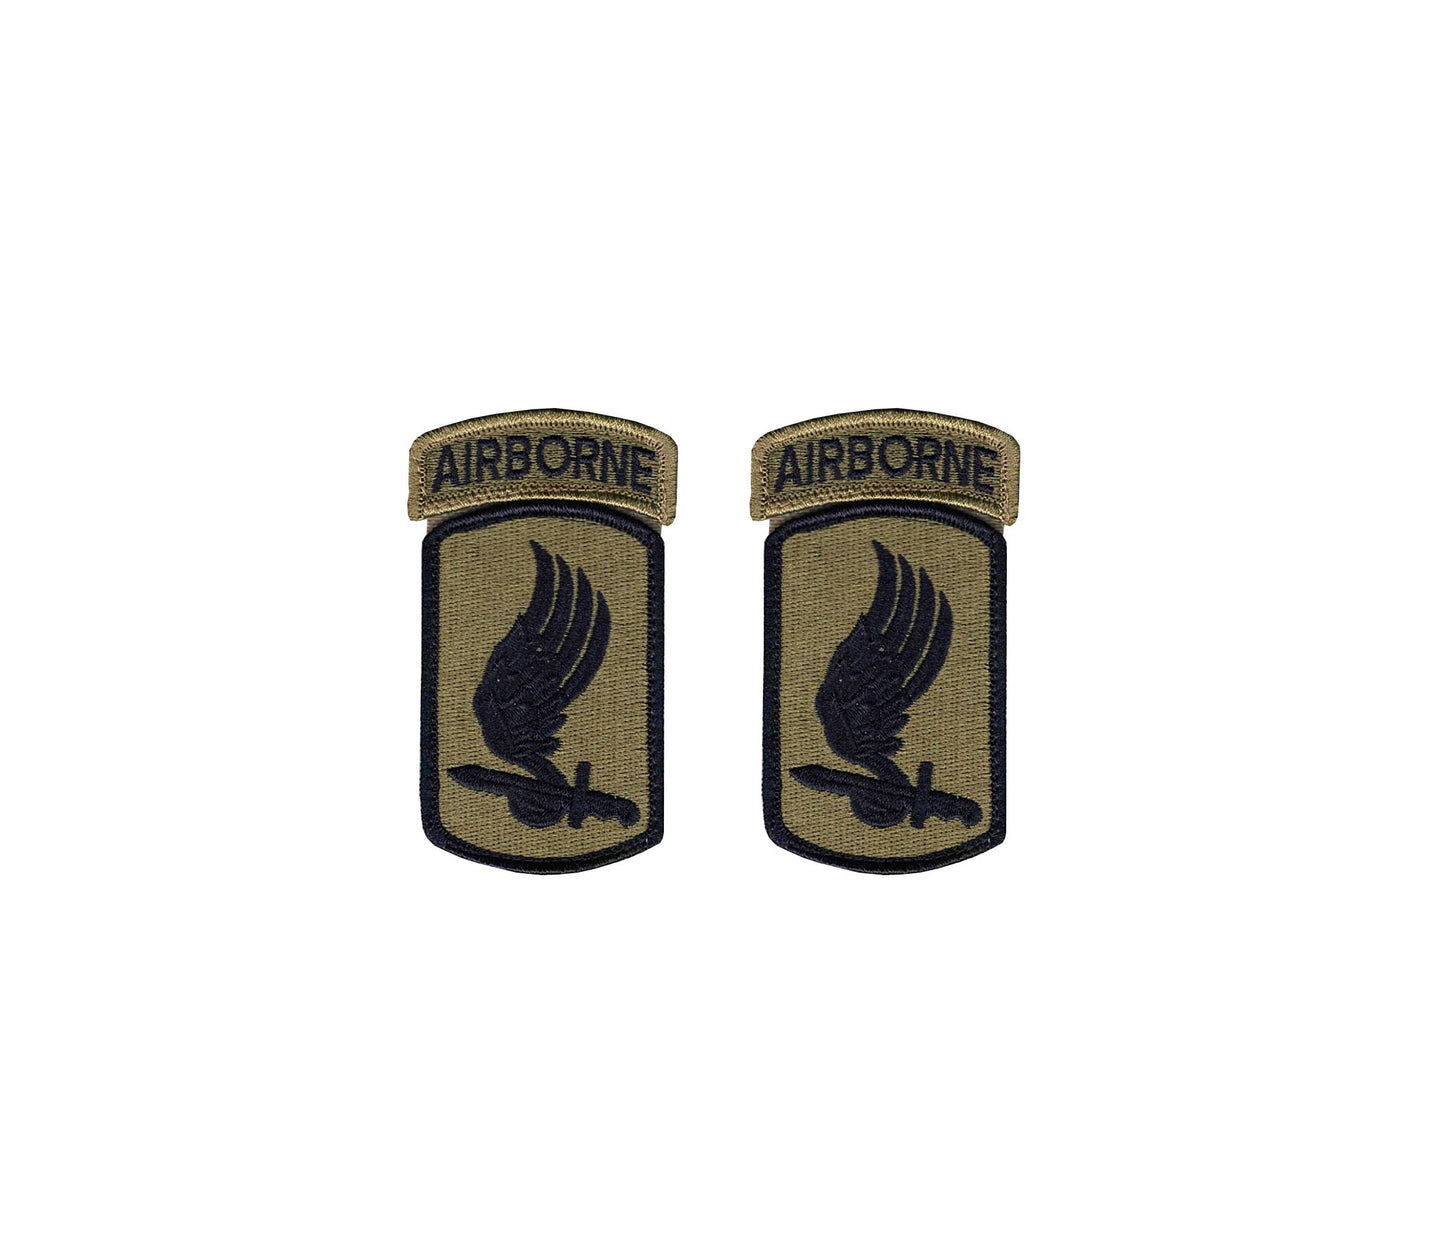 U.S. Army 173rd Airborne Brigade OCP Patch with Hook Fastener and Airborne Tab (pair)